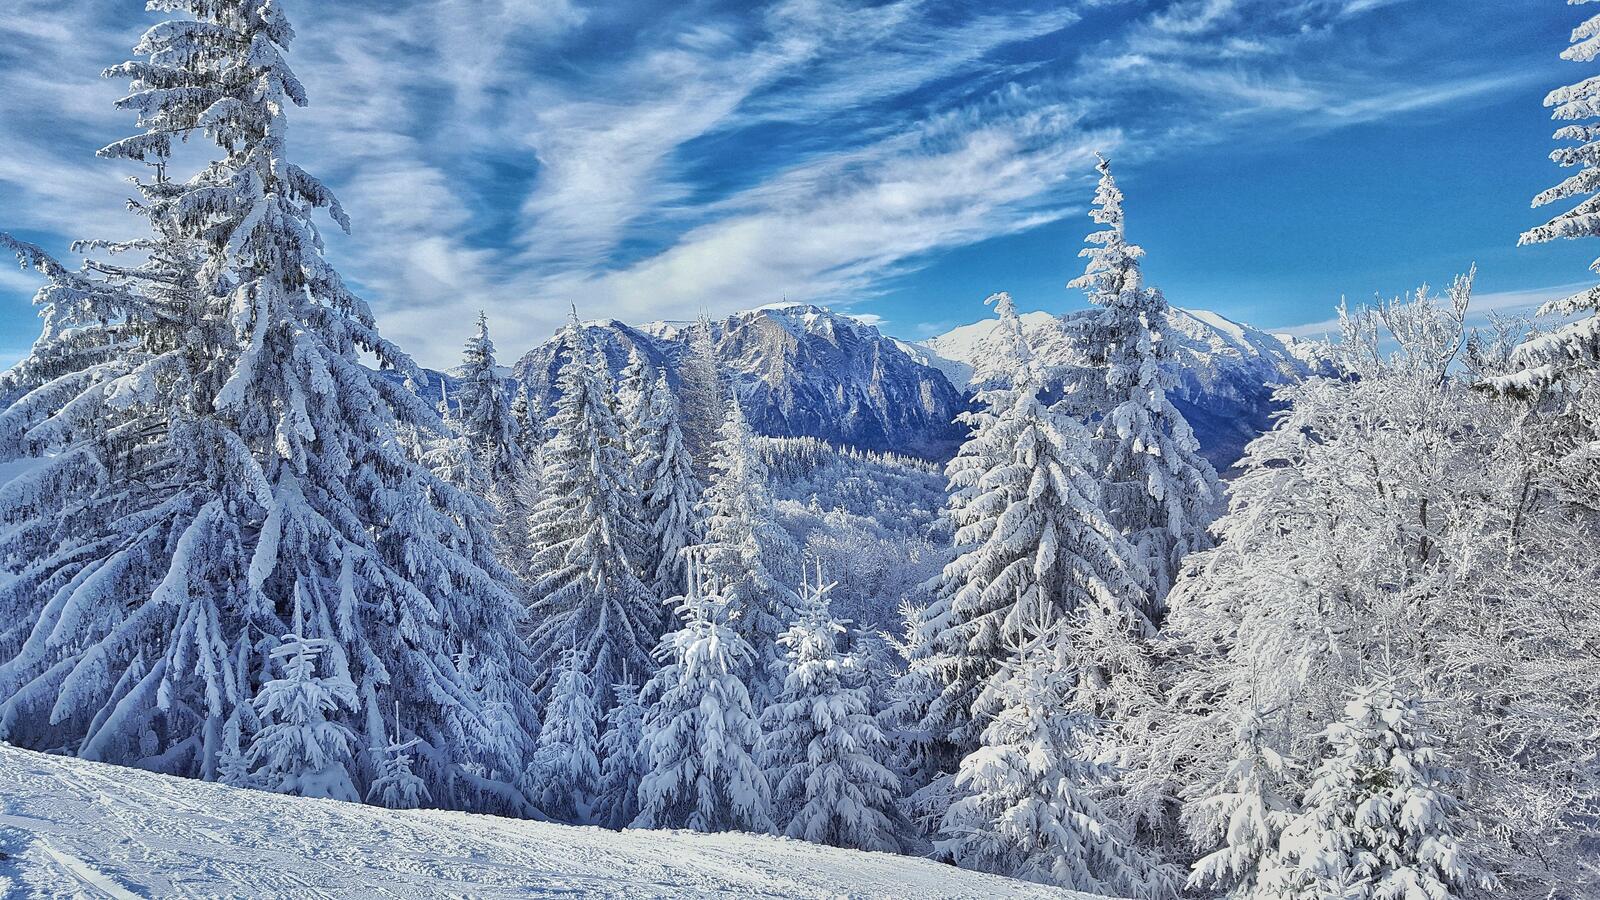 Wallpapers snow on christmas trees landscapes landscape on the desktop